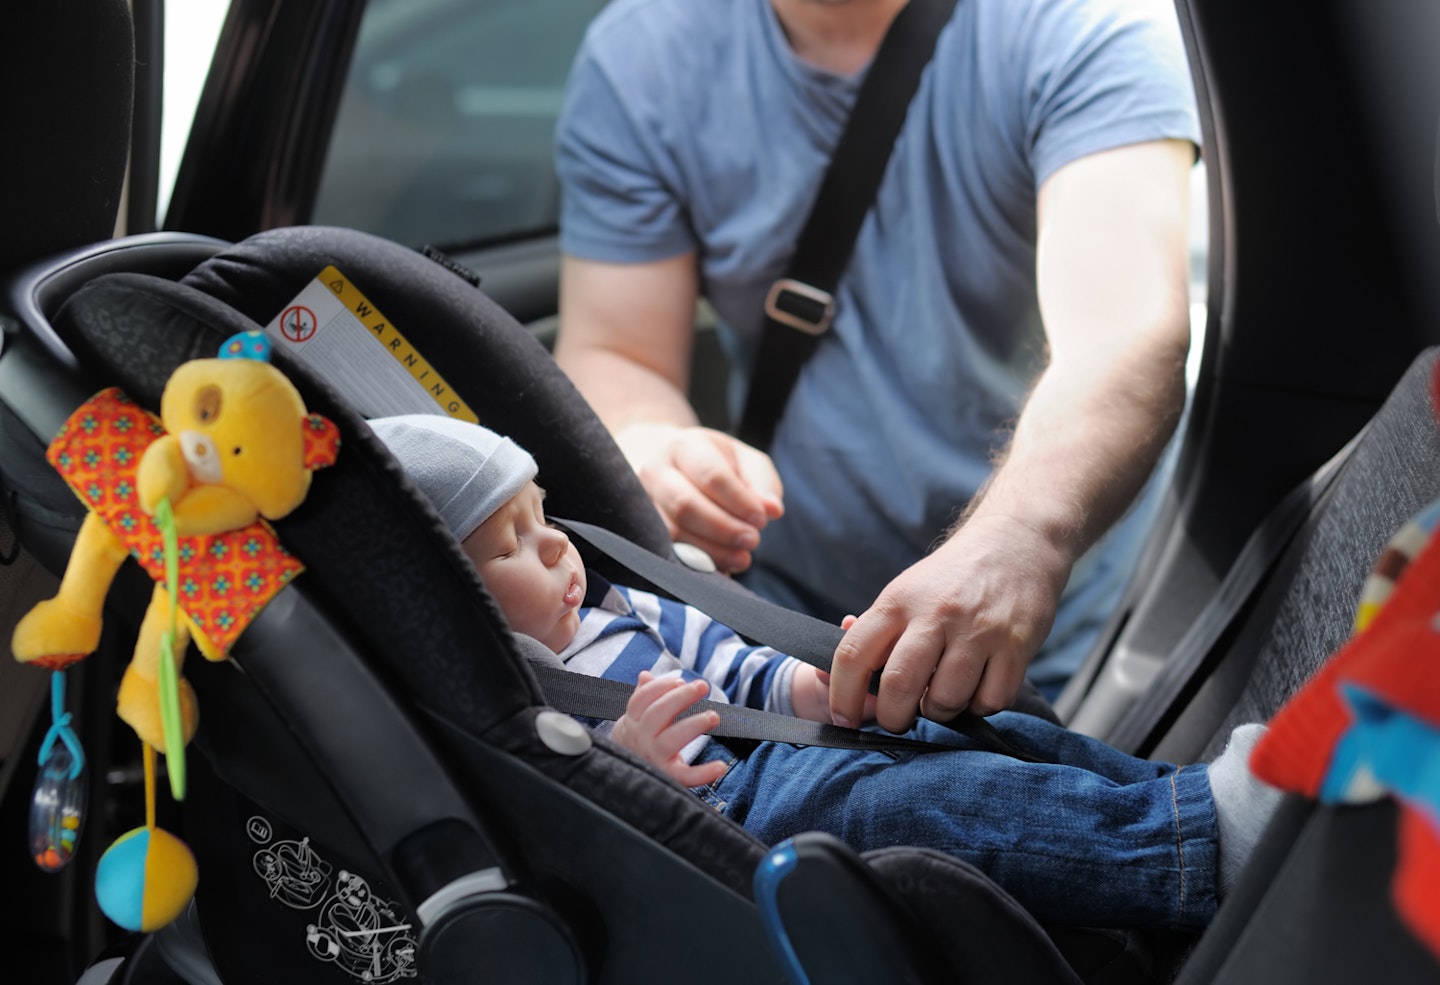 Changes to R44 car seats legislation – what you need to know